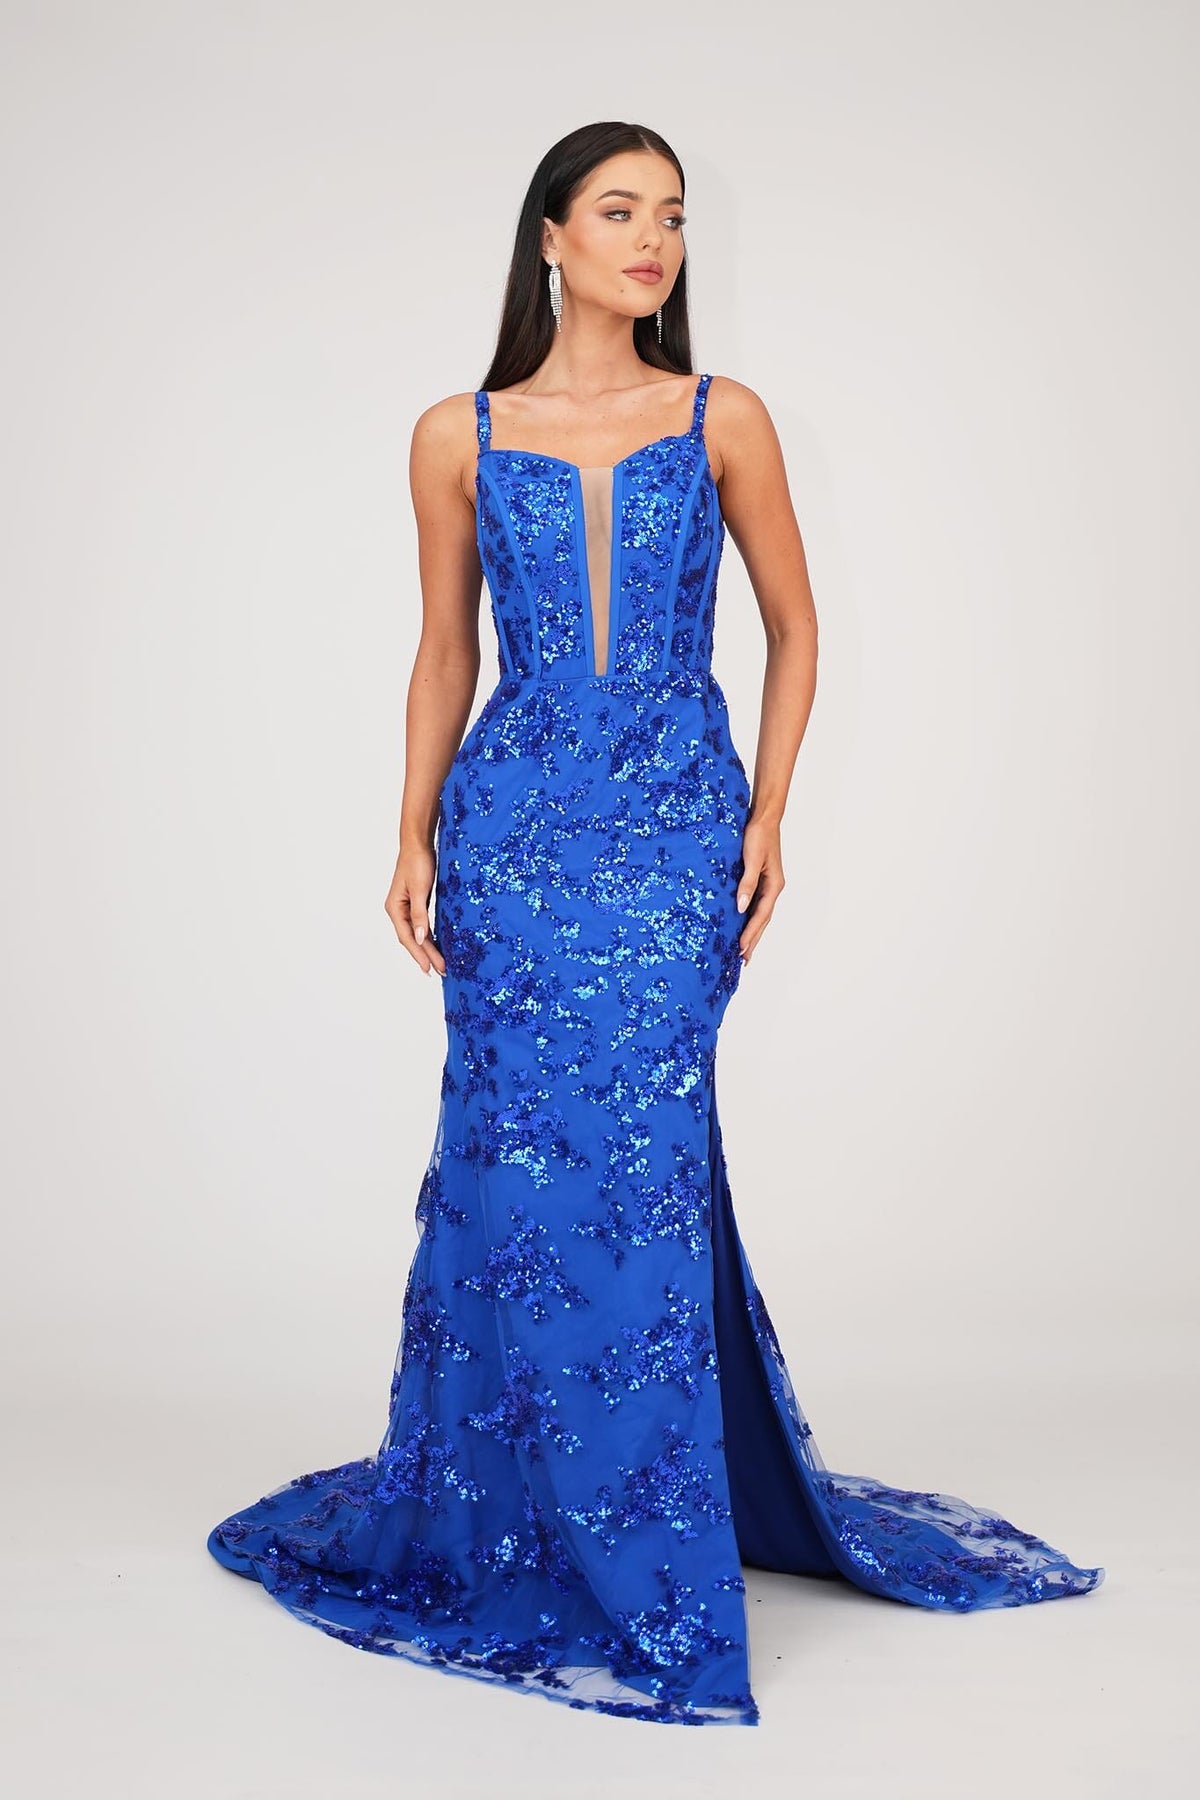 Royal Blue Floral Embellished Sequins Floor Length Evening Gown with Corset Bodice, Mesh Insert, Side Slit and Lace Up Open Back